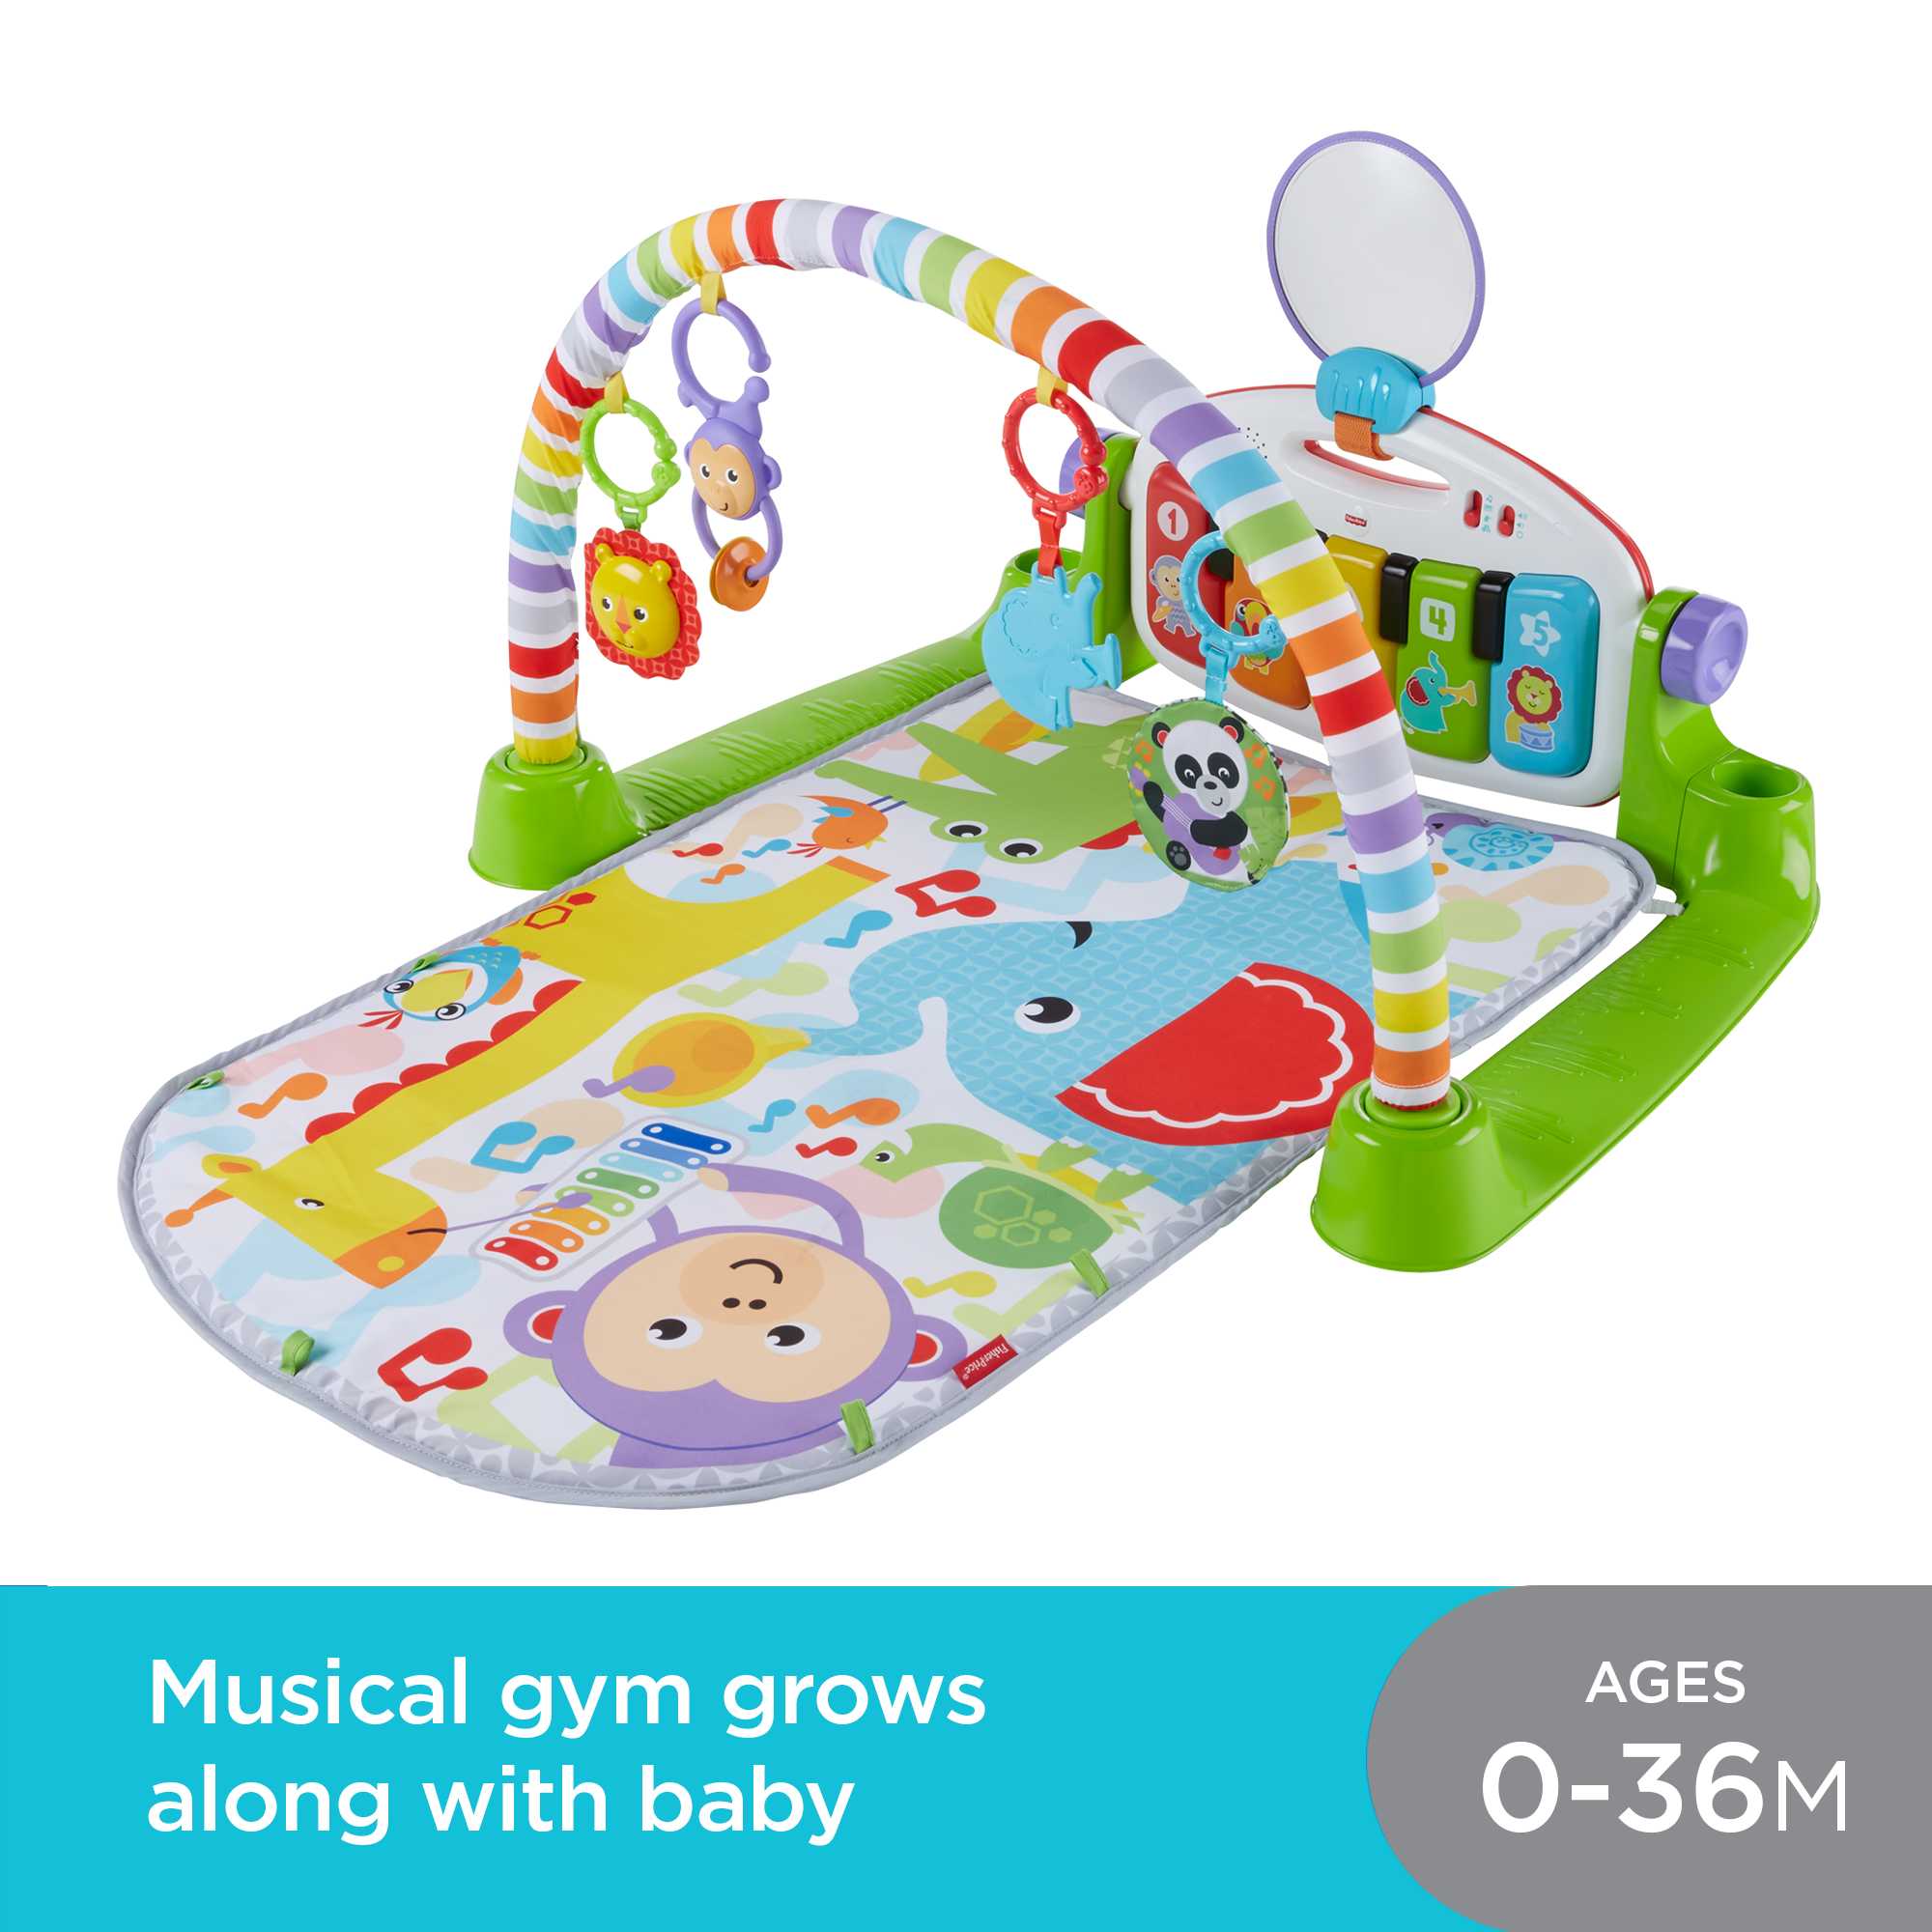 Fisher-Price Deluxe Kick & Play Piano Gym Infant Playmat with Electronic Learning Toy, Green - image 5 of 10